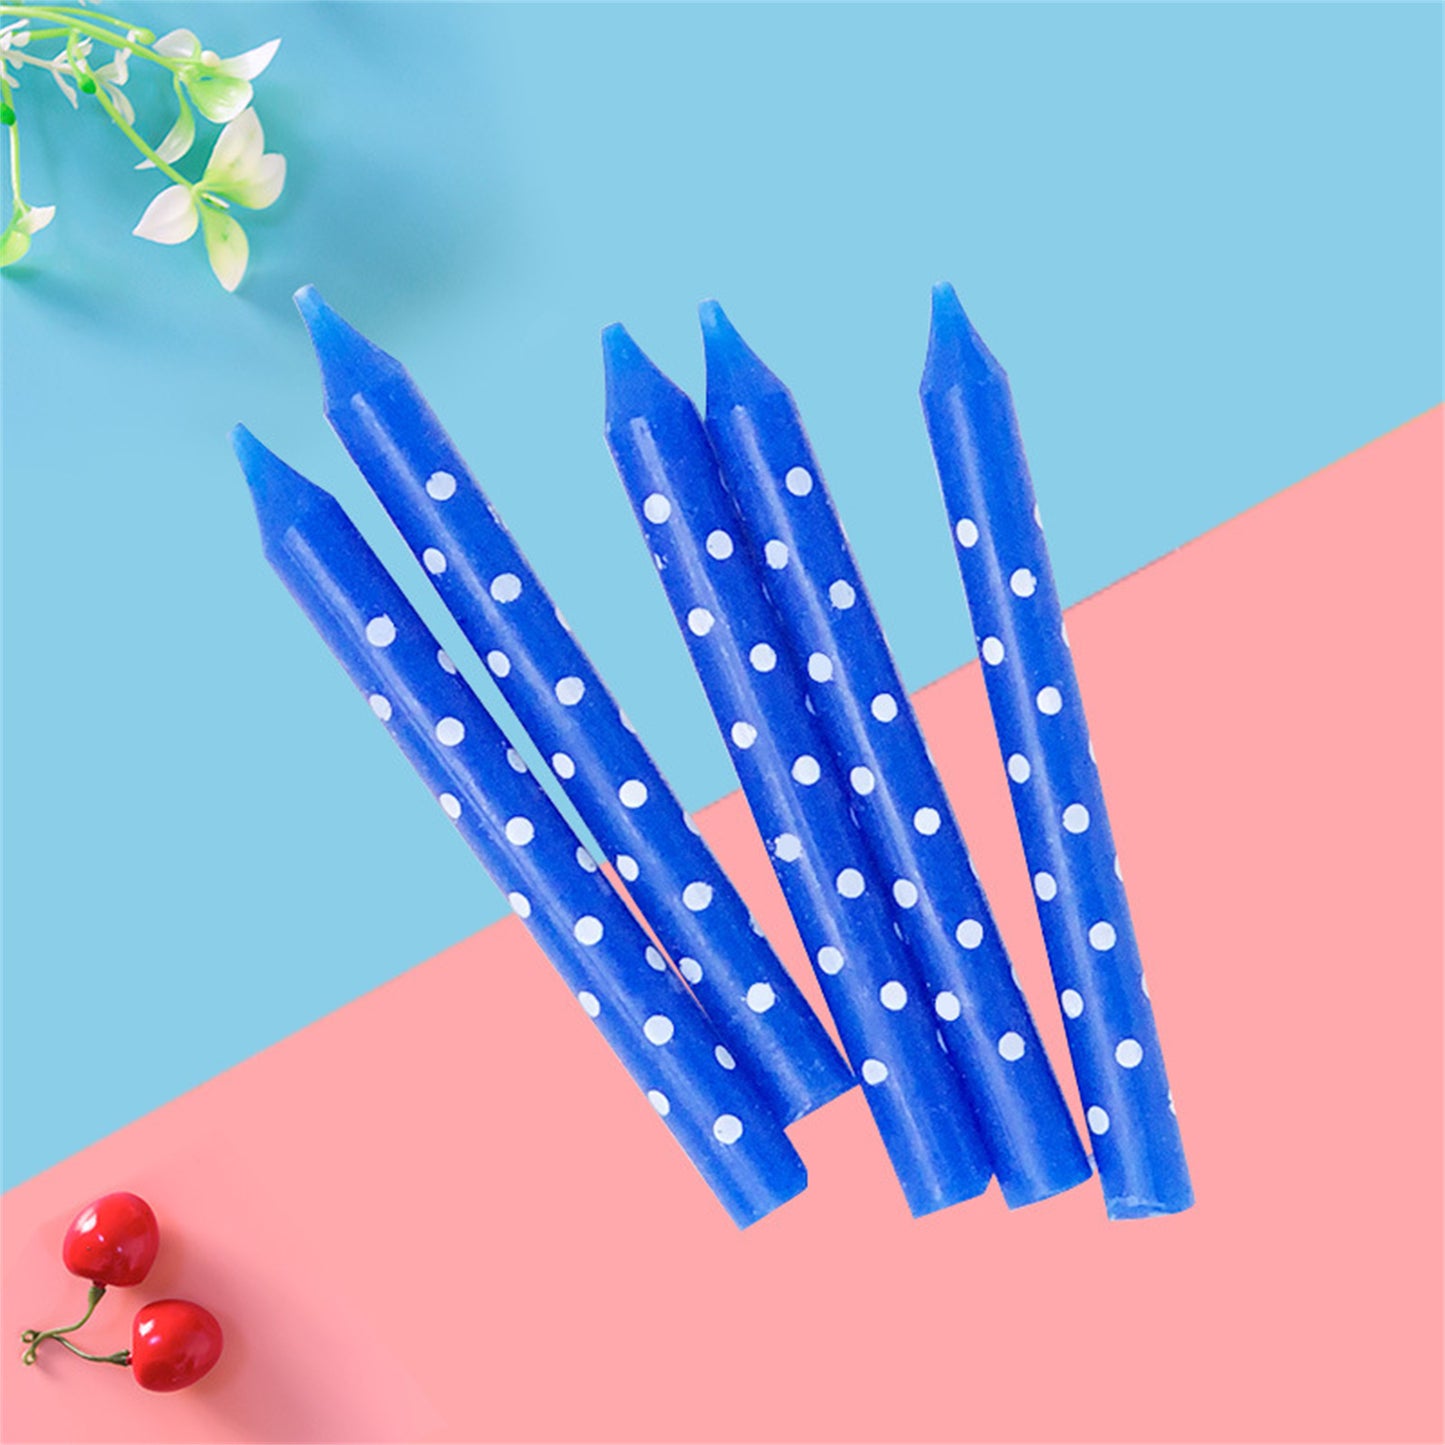 Polka dot candle creative dot pattern with bottom support , 6pcs